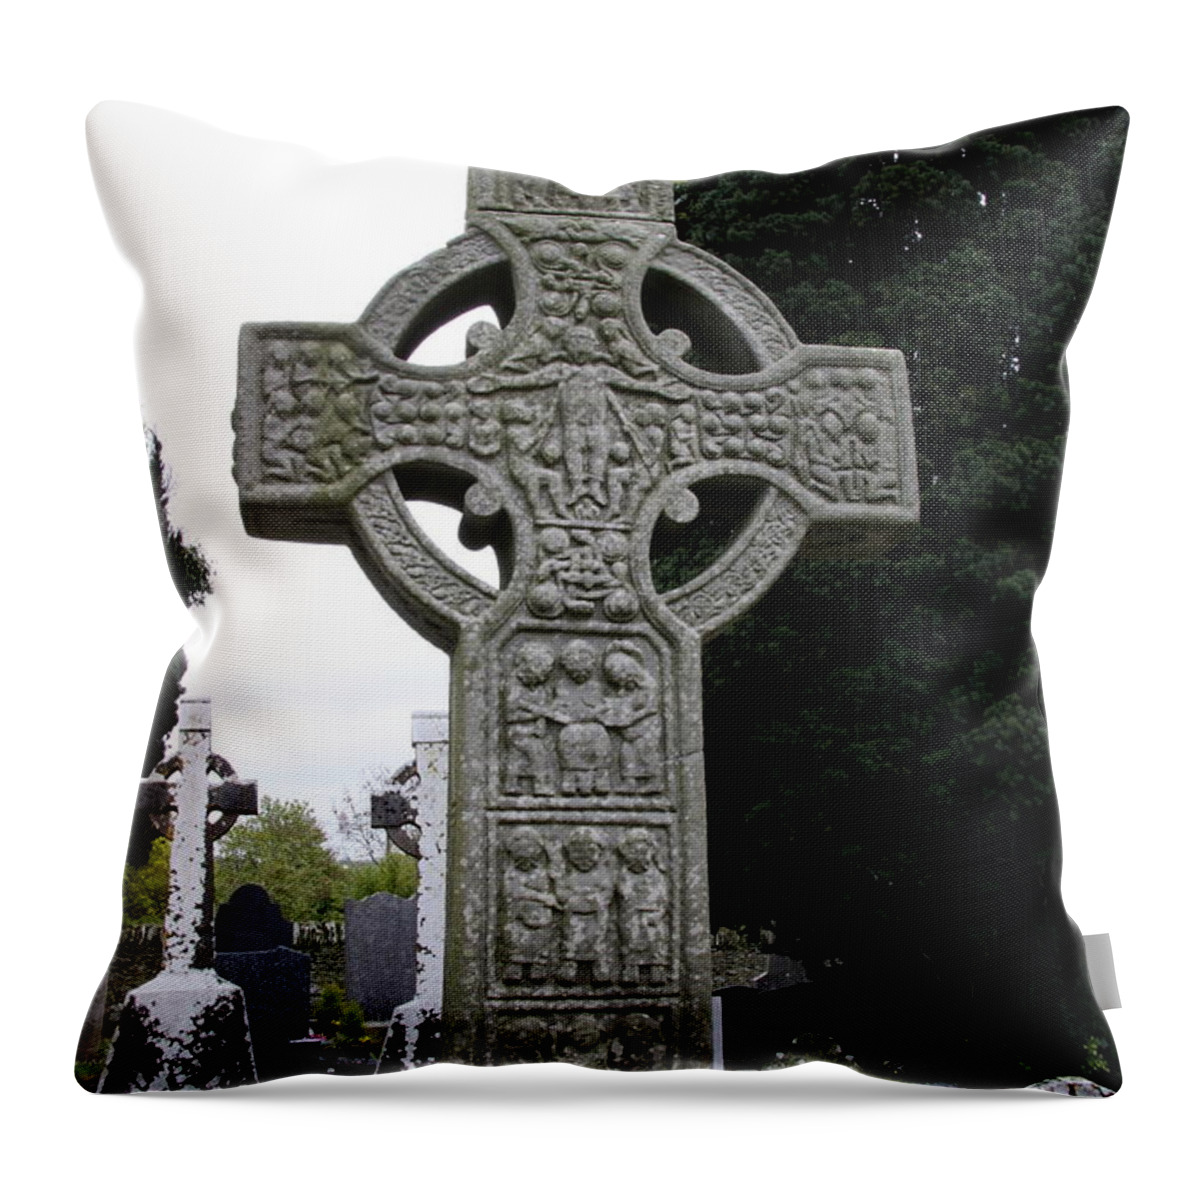 Muiredach's Cross Throw Pillow featuring the photograph Muiredach's Cross - Monasterboice by Christiane Schulze Art And Photography